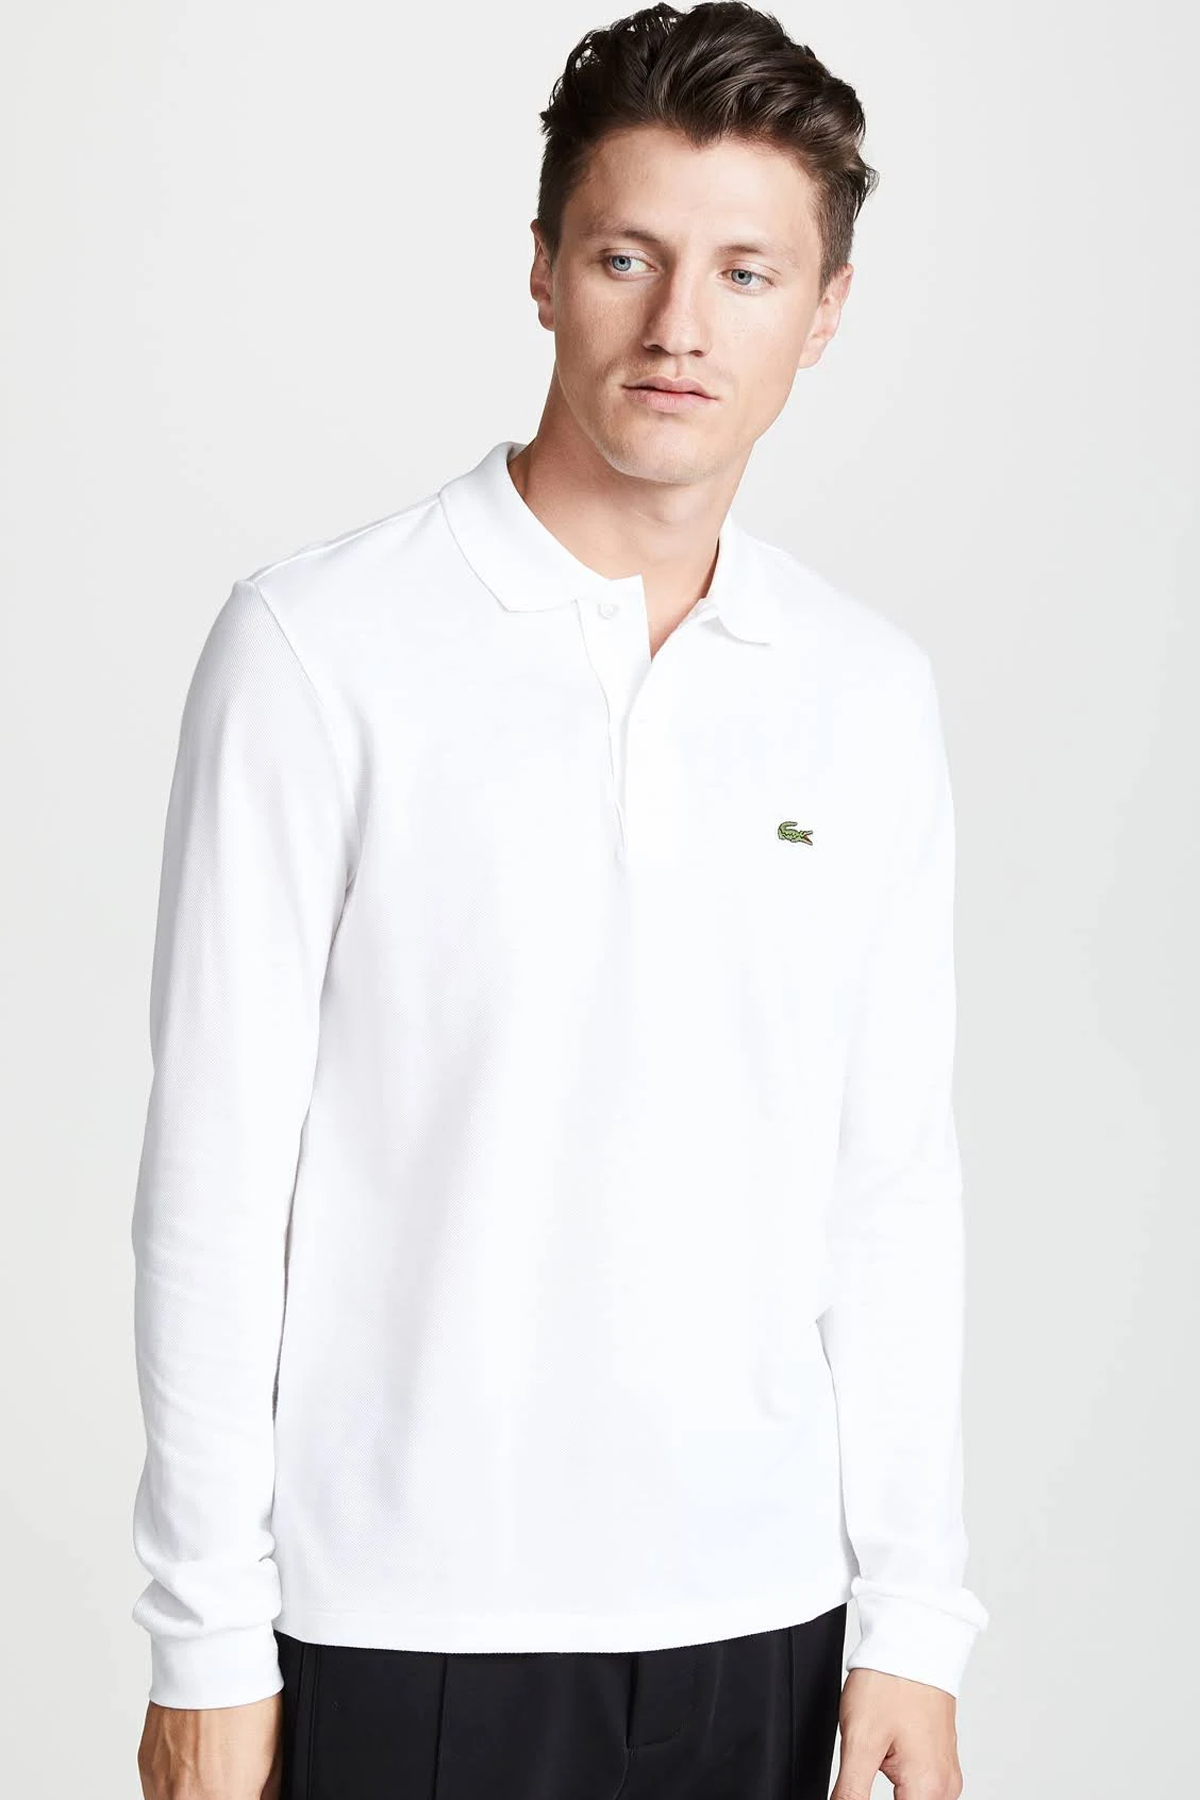 Lacoste White L1312 custom polo shirts with logo